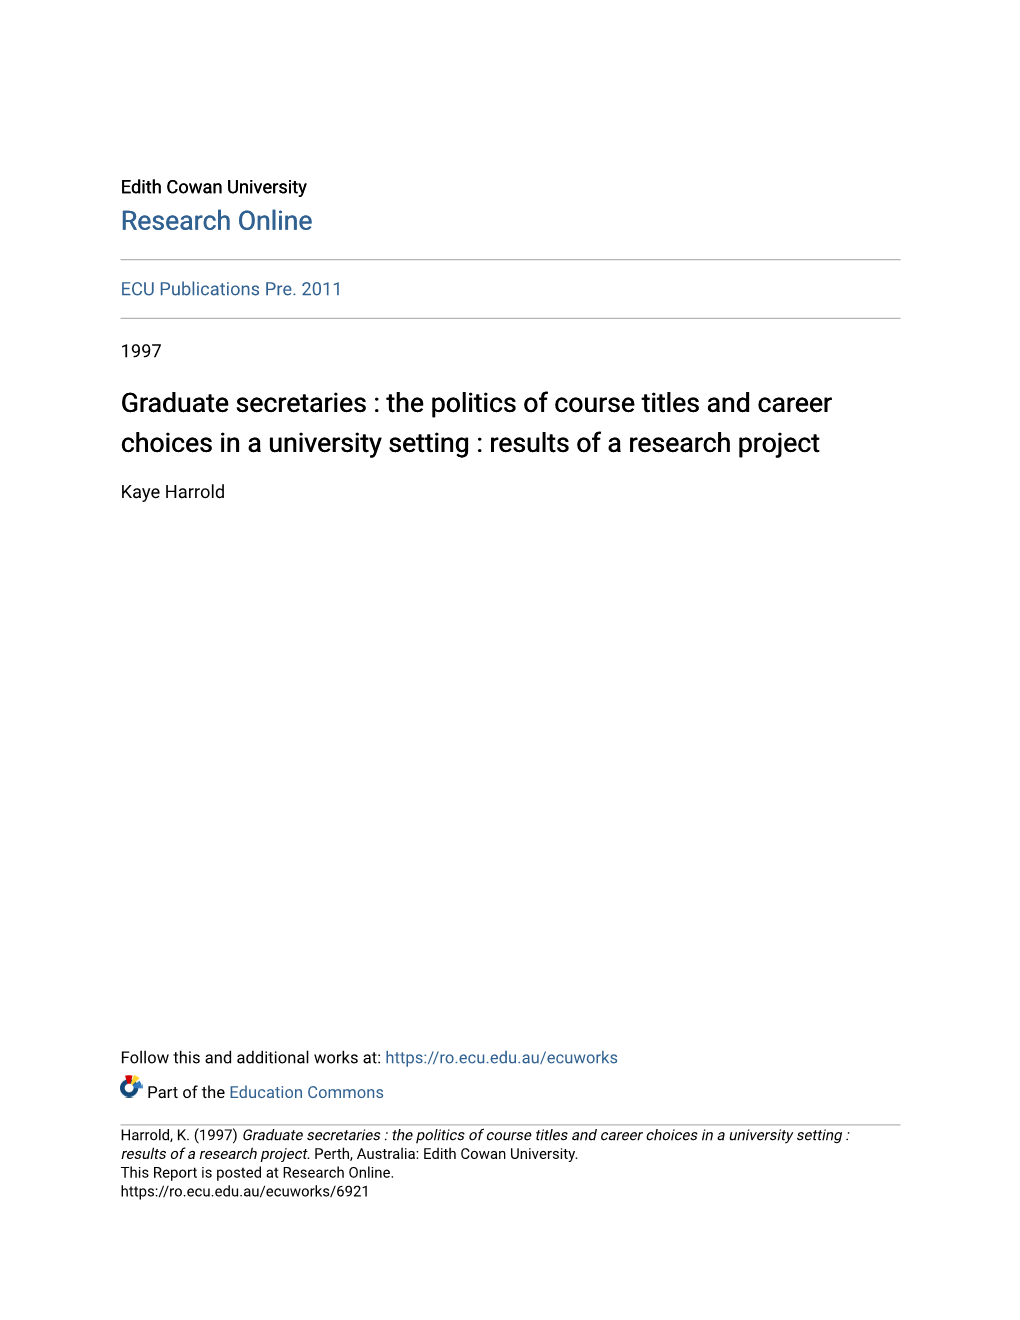 Graduate Secretaries : the Politics of Course Titles and Career Choices in a University Setting : Results of a Research Project